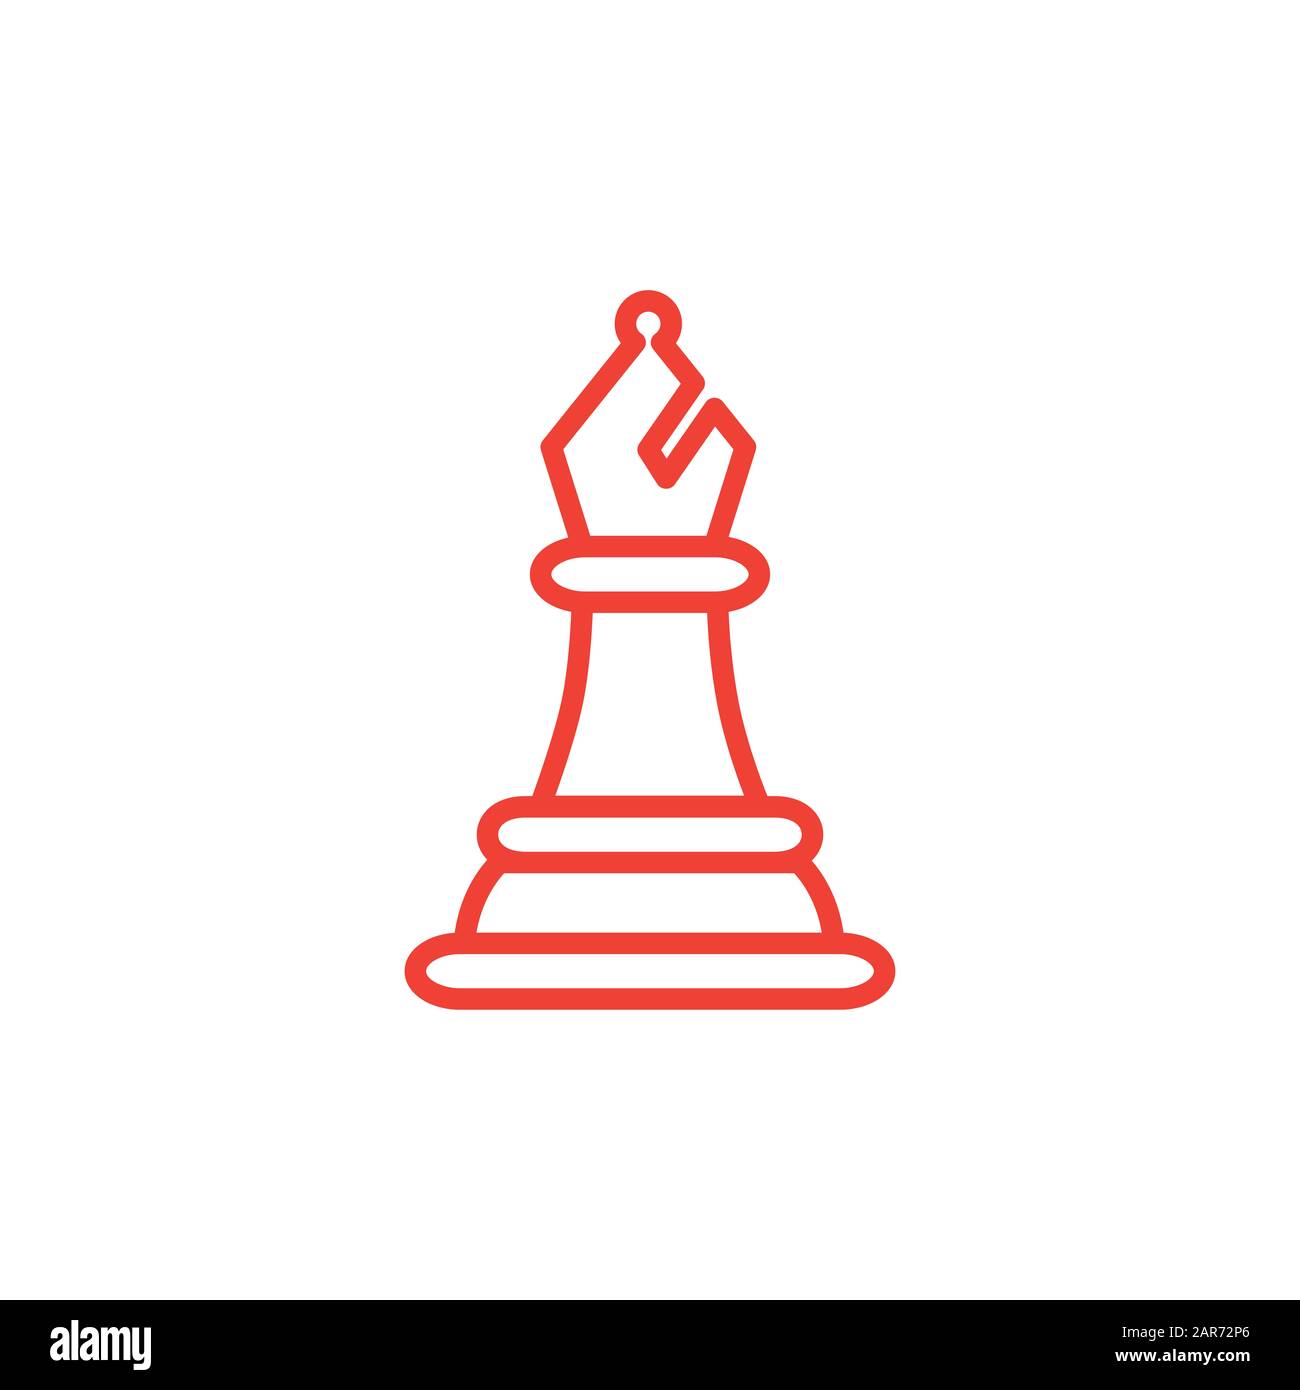 SVG > knight pieces rook pawn - Free SVG Image & Icon.